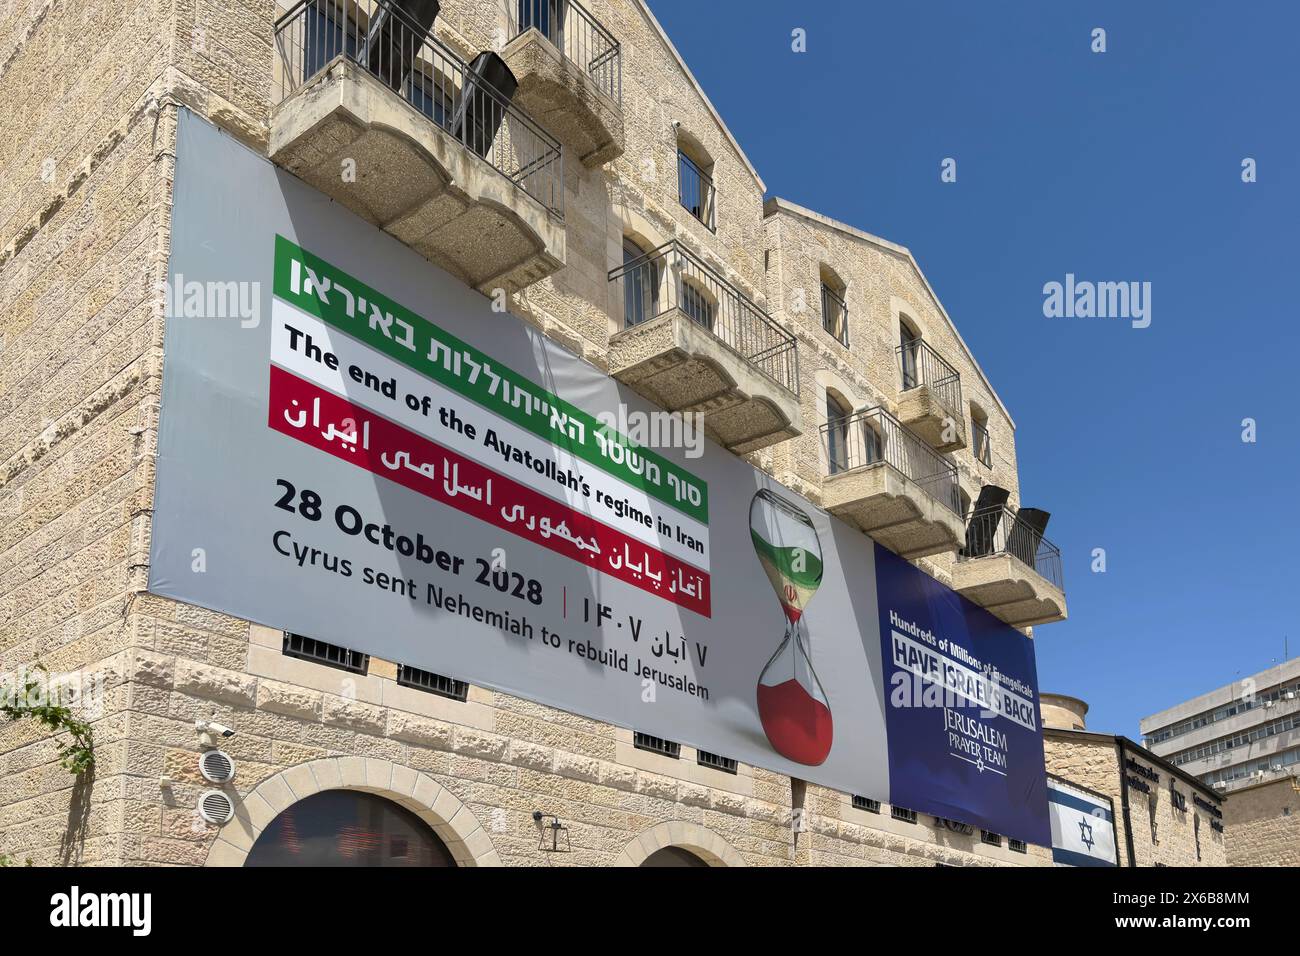 JERUSALEM - MAY 6: A billboard funded by an Evangelical group on the building housing The Friends of Zion FOZ Museum which celebrates Christian Zionists and their contribution to Israel, predicts Iran's Ayatollah-led government will fall by October 28, 2028. The statement displays an hourglass depicting the regime's decline on May 6, 2024 in Jerusalem. Kamal Kharrazi, an adviser to Iran's Supreme Leader Ayatollah Ali Khamenei, warned Tehran would rethink its nuclear doctrine if Israel threatens its existence amid West Asian upheaval after the Gaza war. Stock Photo